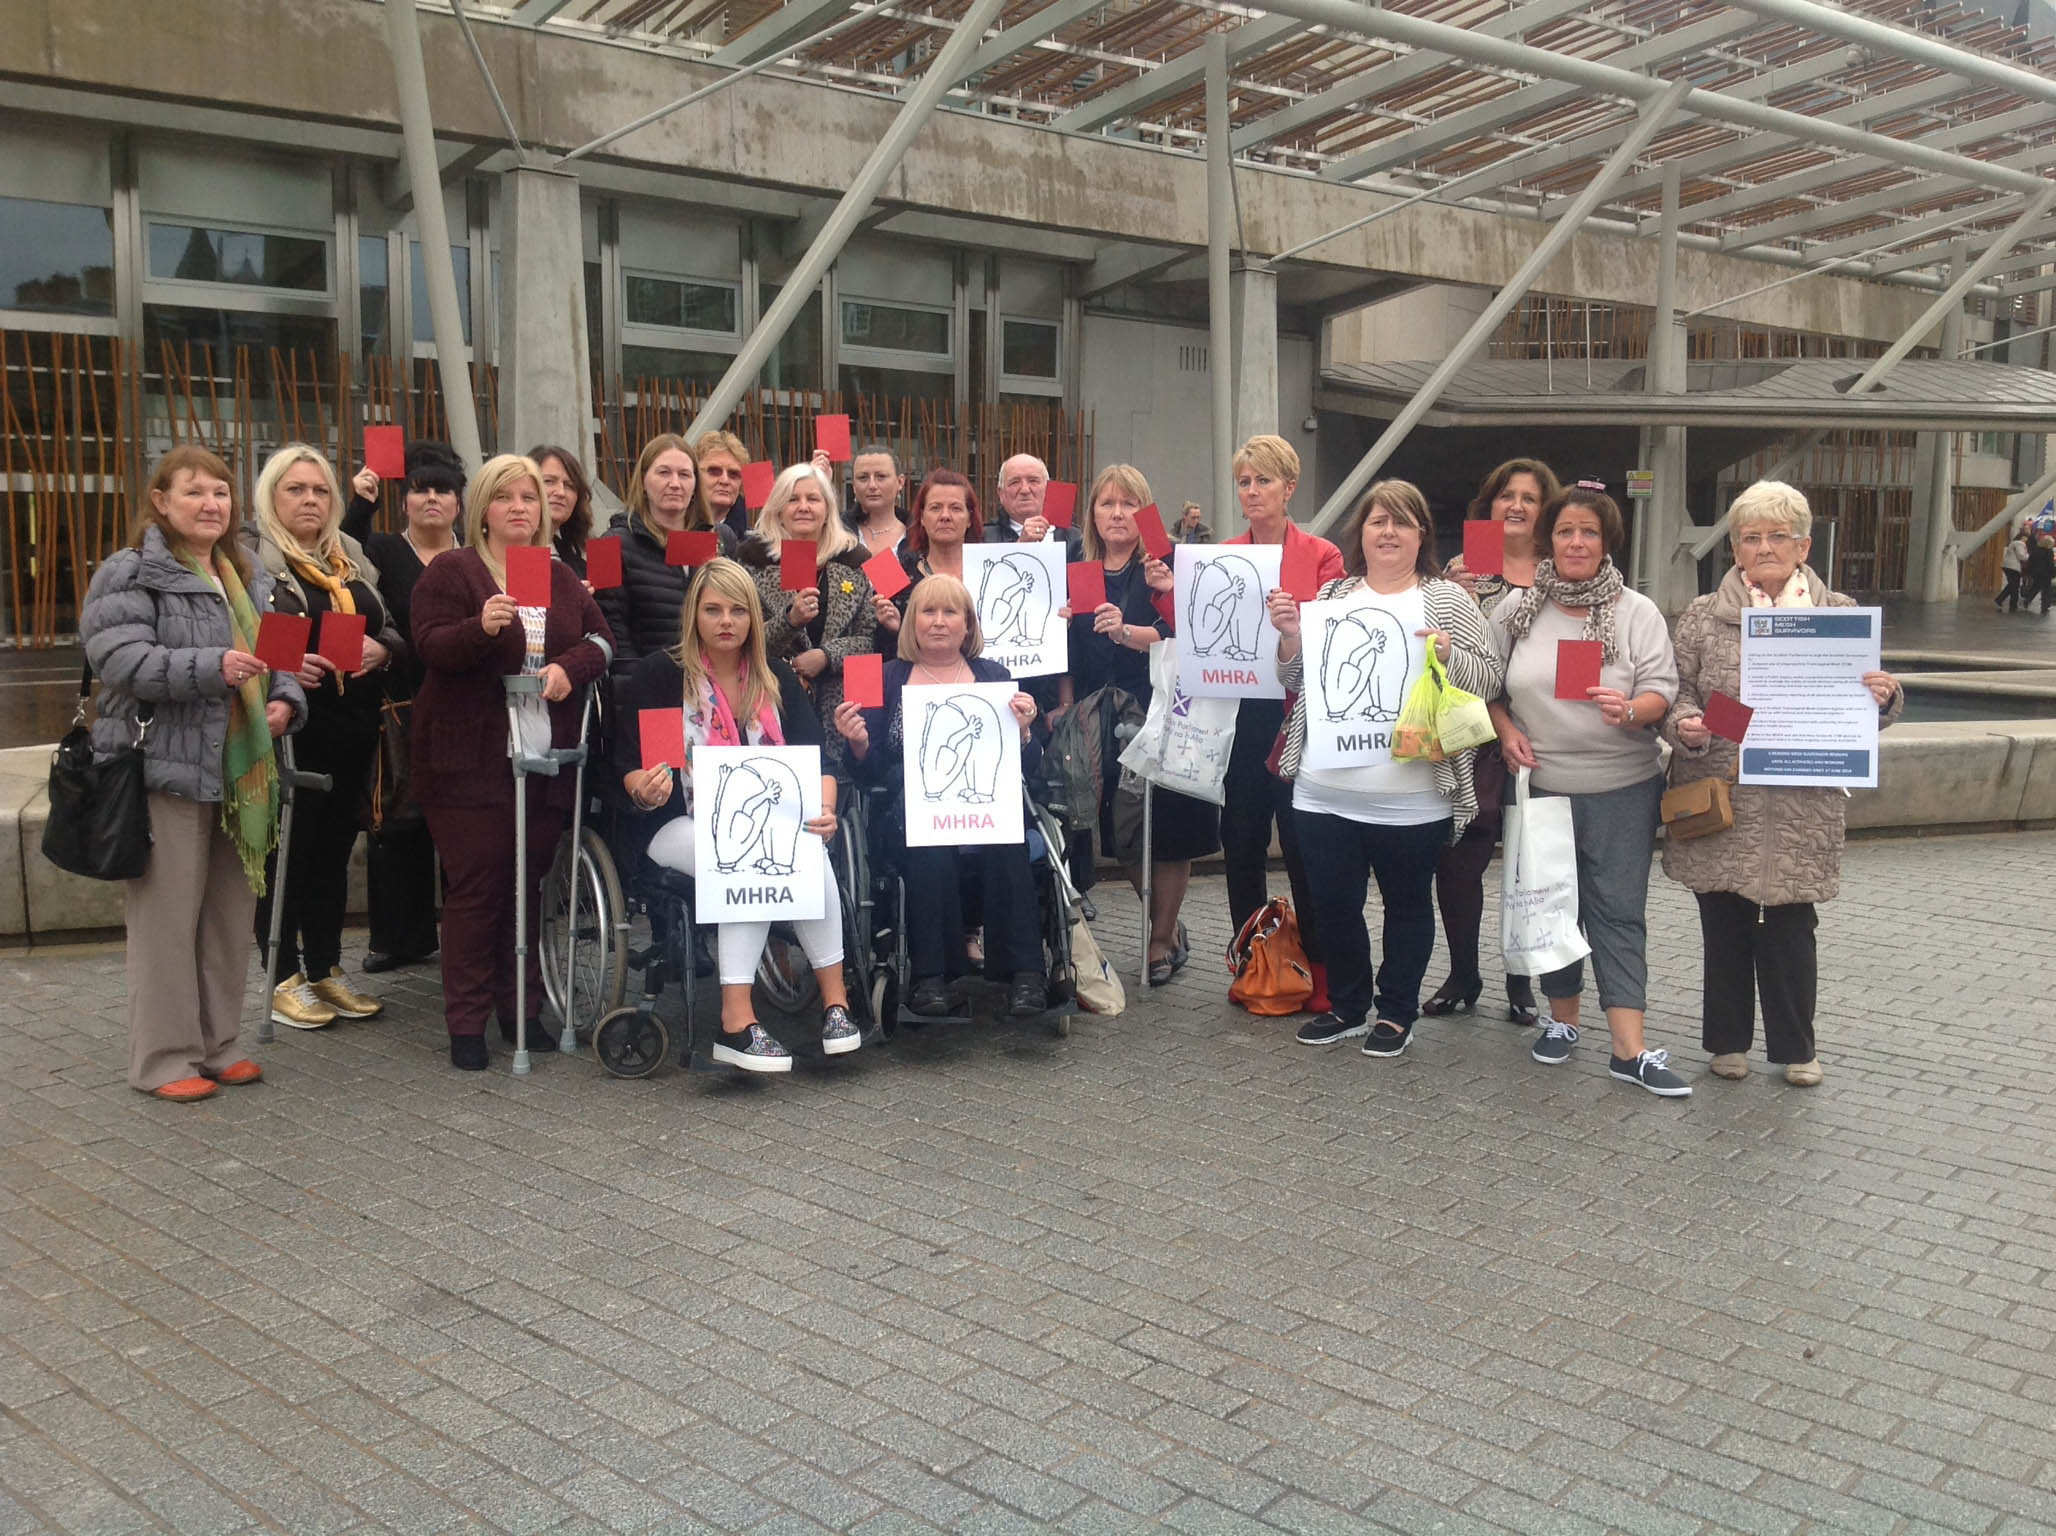 A group of campaigners lobbying against the use of mesh in surgical operations at the Scottish Parliament